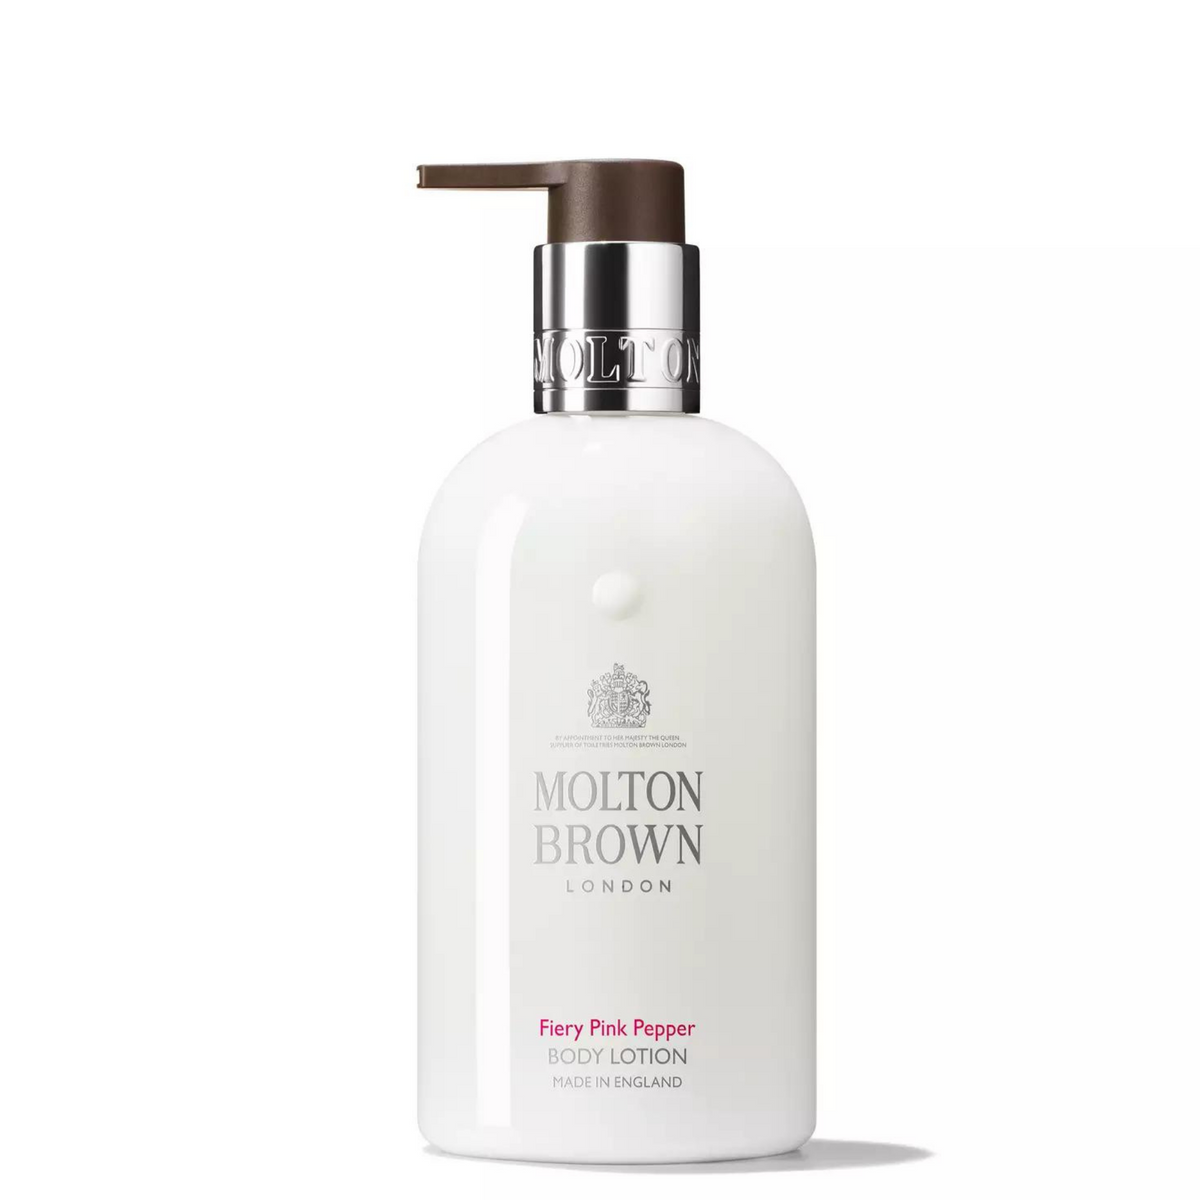 Primary image of Pink Pepperpod Nourishing Body Lotion